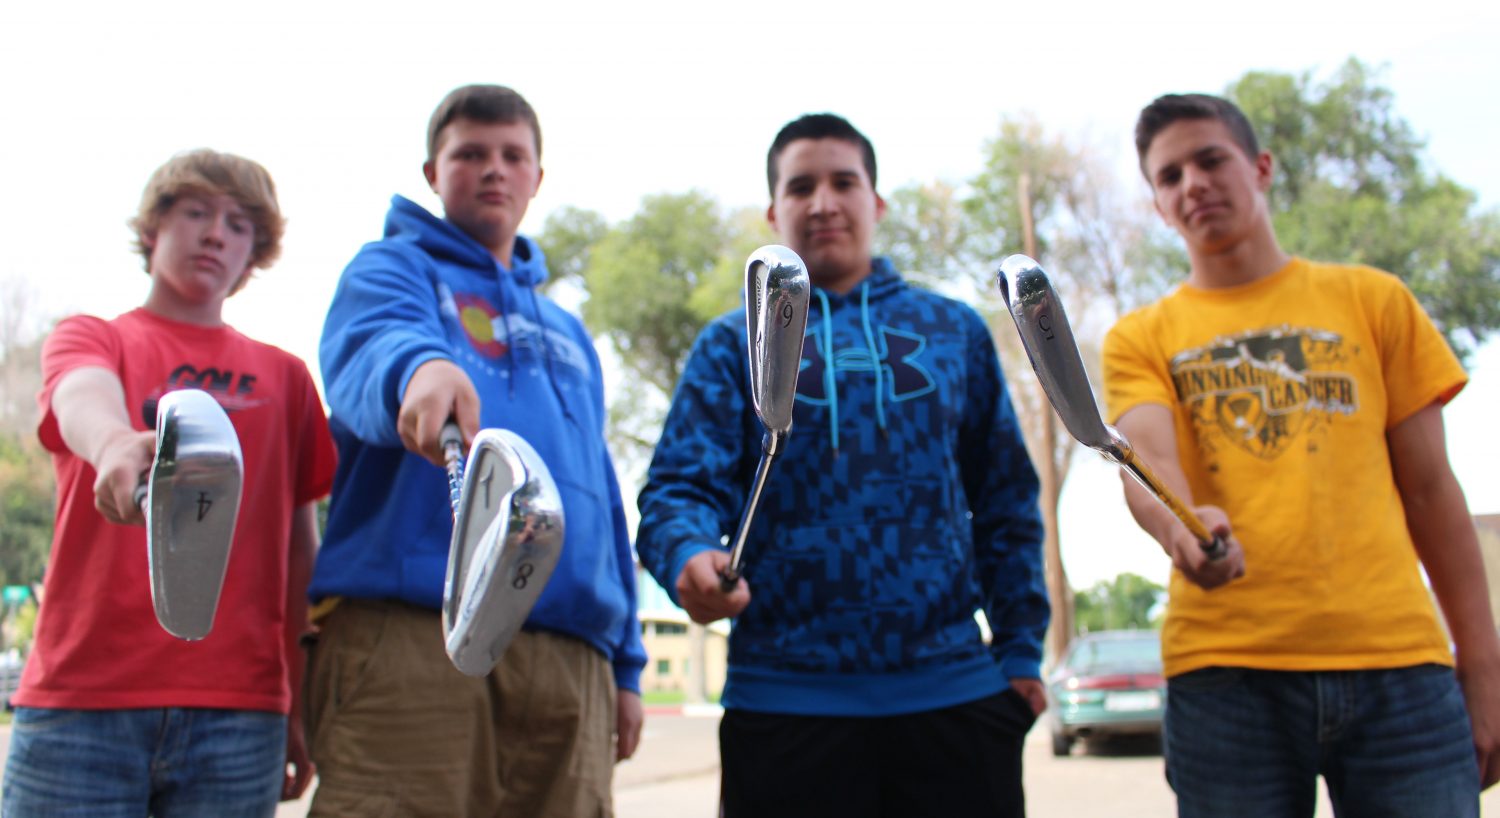 Peter Grossenbacher,  Andy Geisick, Ethan Alcazar, and J.D. Truax get serious about state golf, which begins this week. (Cameron Moser)